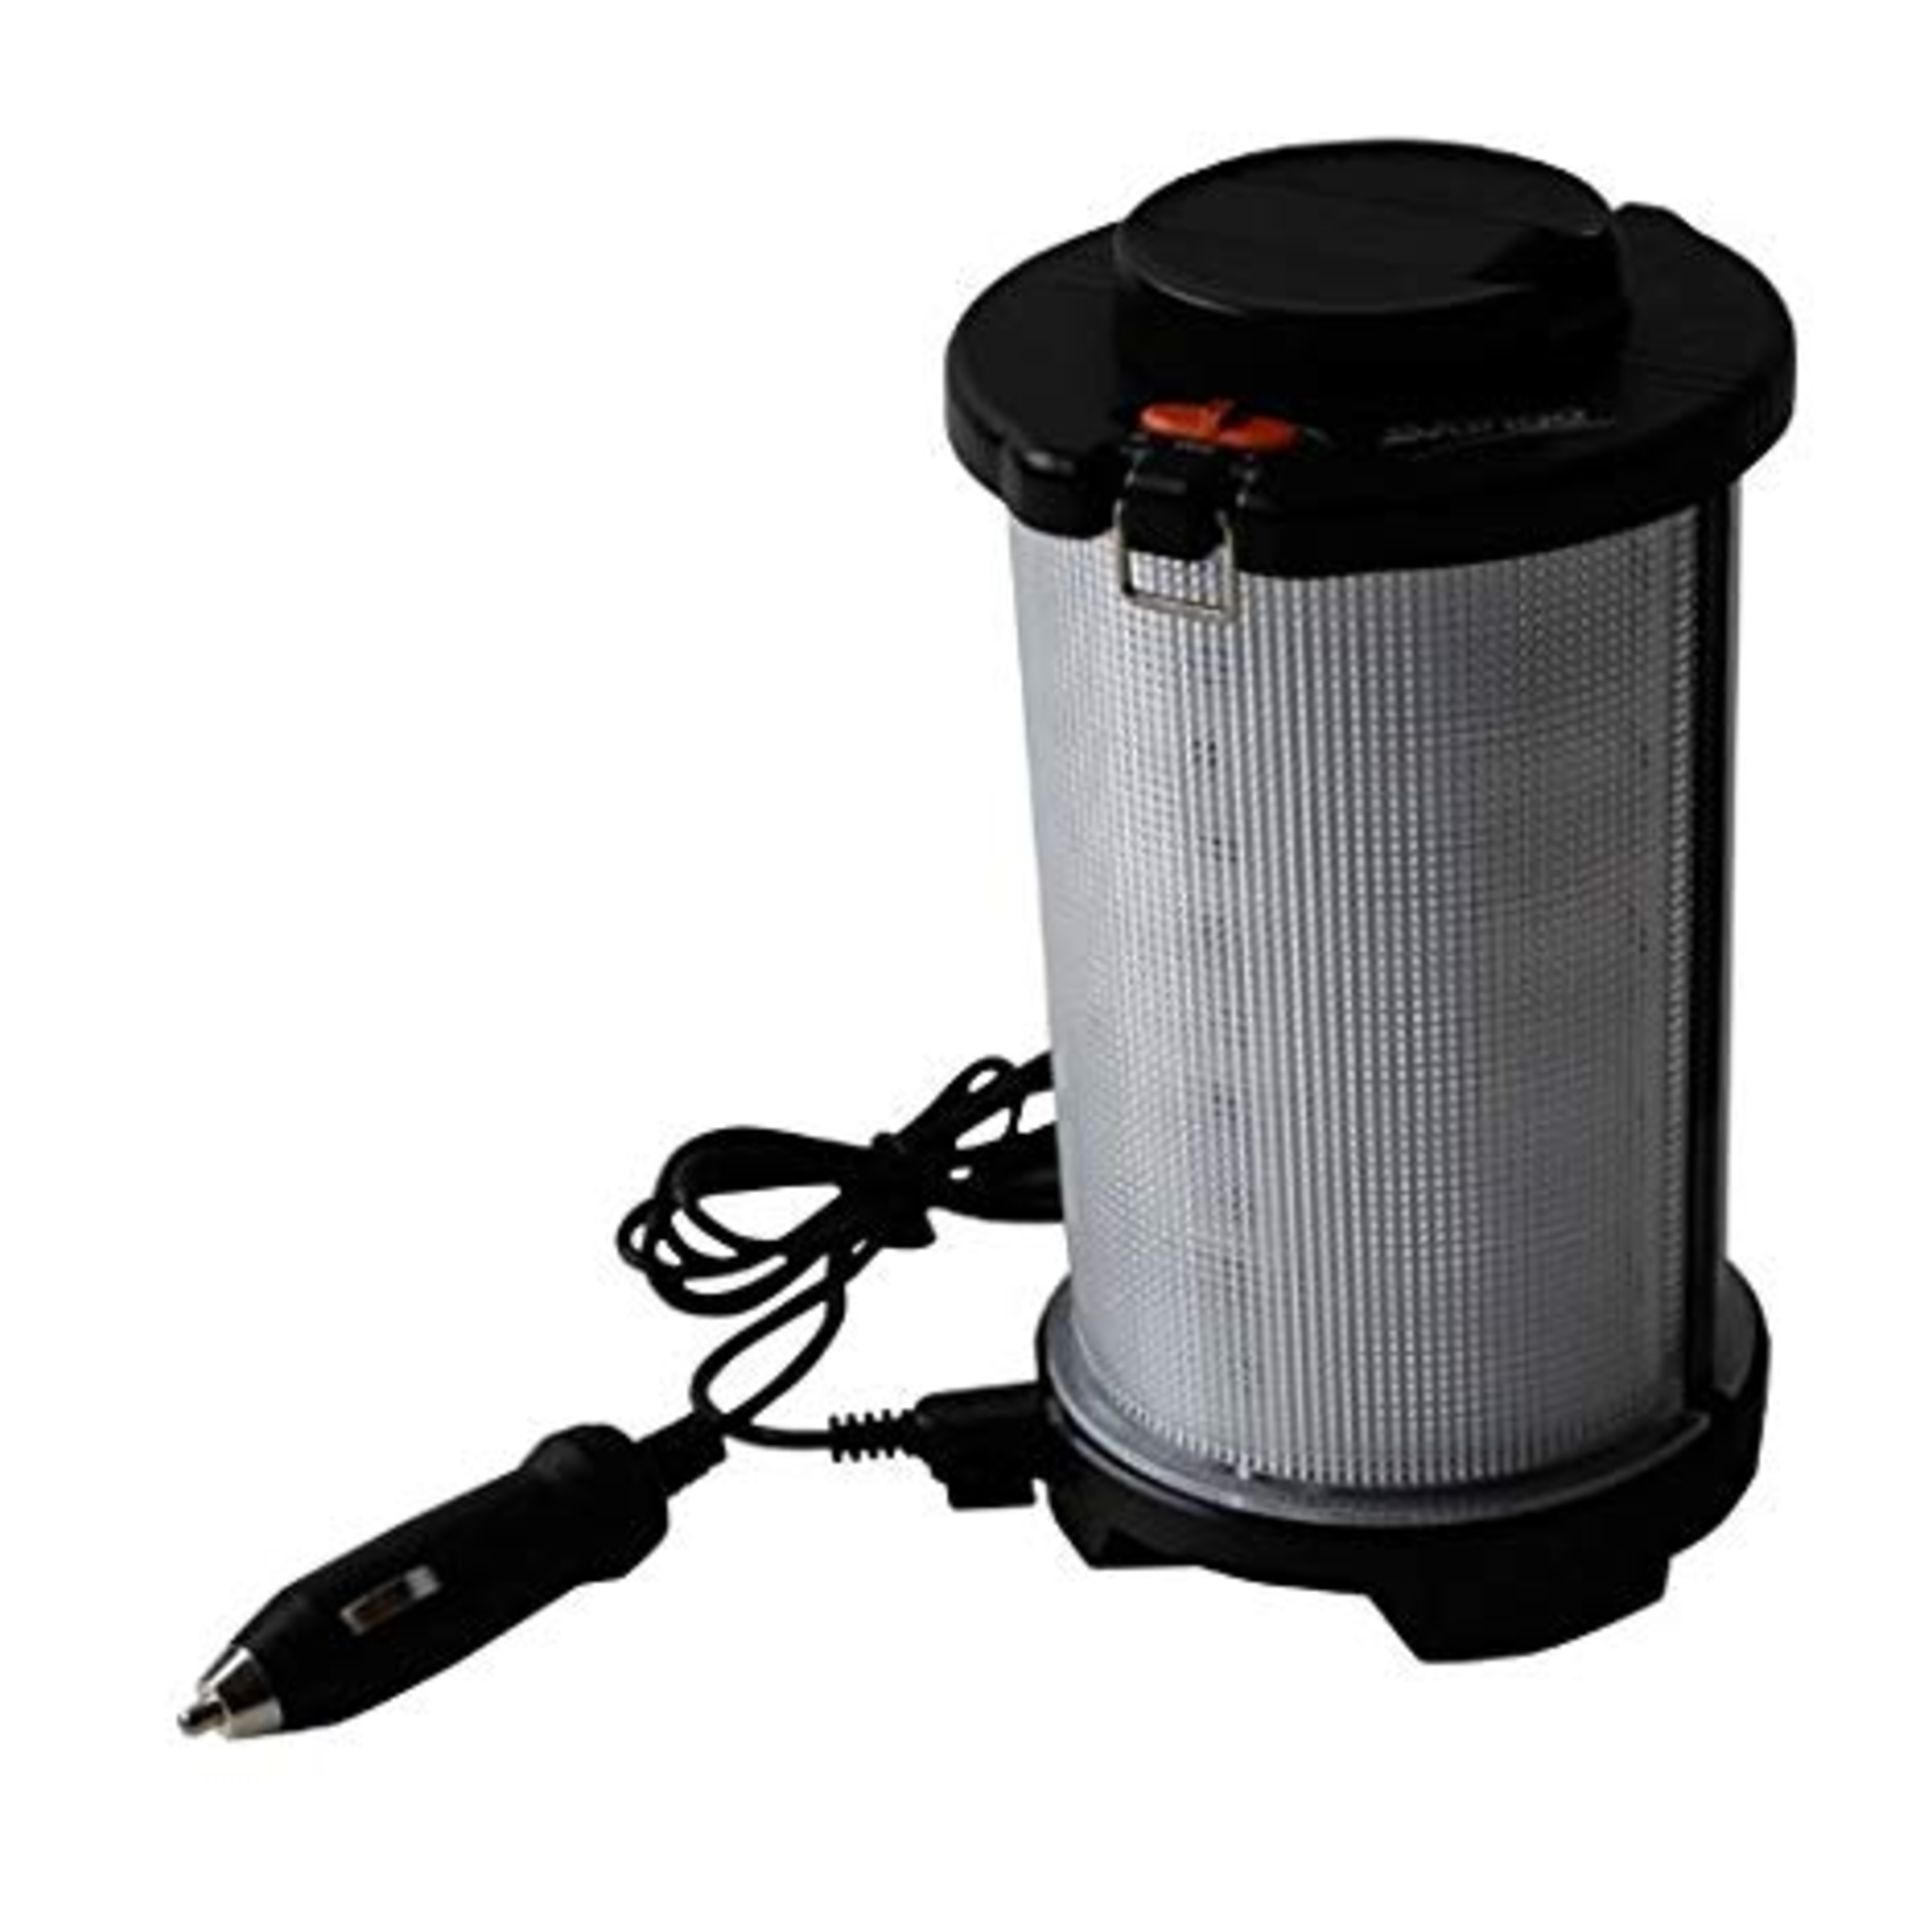 V Brand New Vango Rechargable Light Barrel Lantern - RRP £32.60 - Can Charge With Cigarette